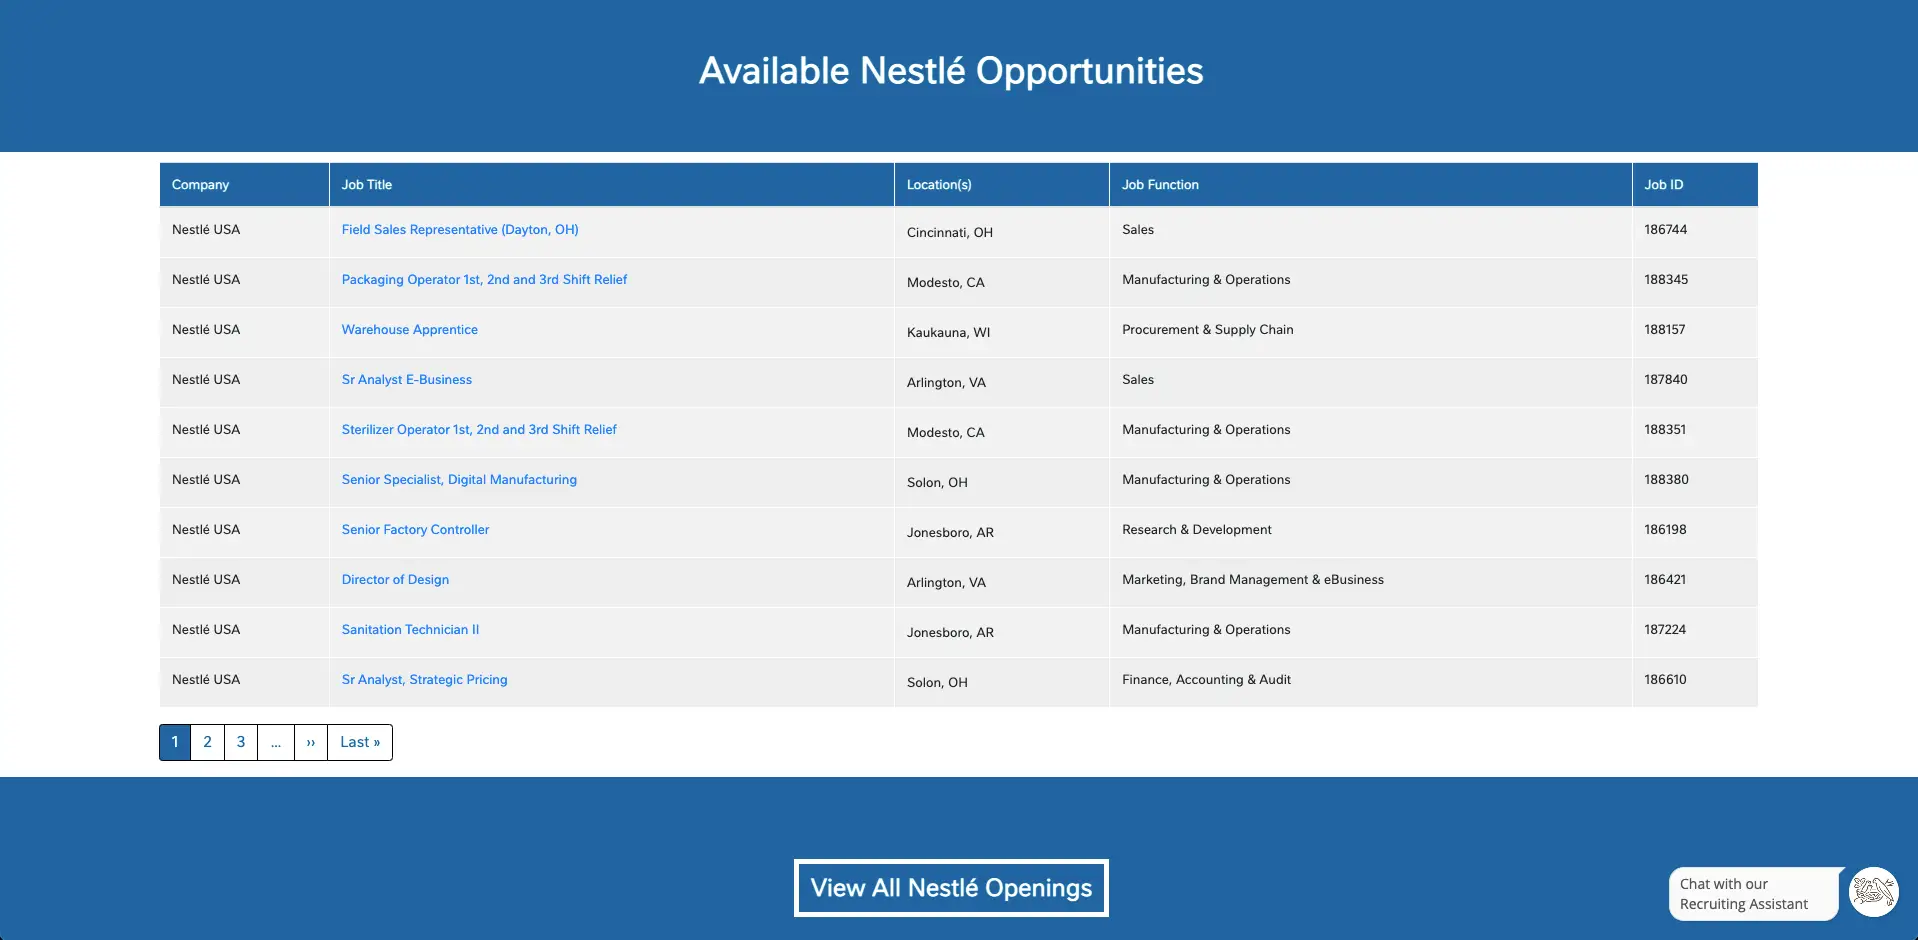 nestle-usa-available-career-opportunities